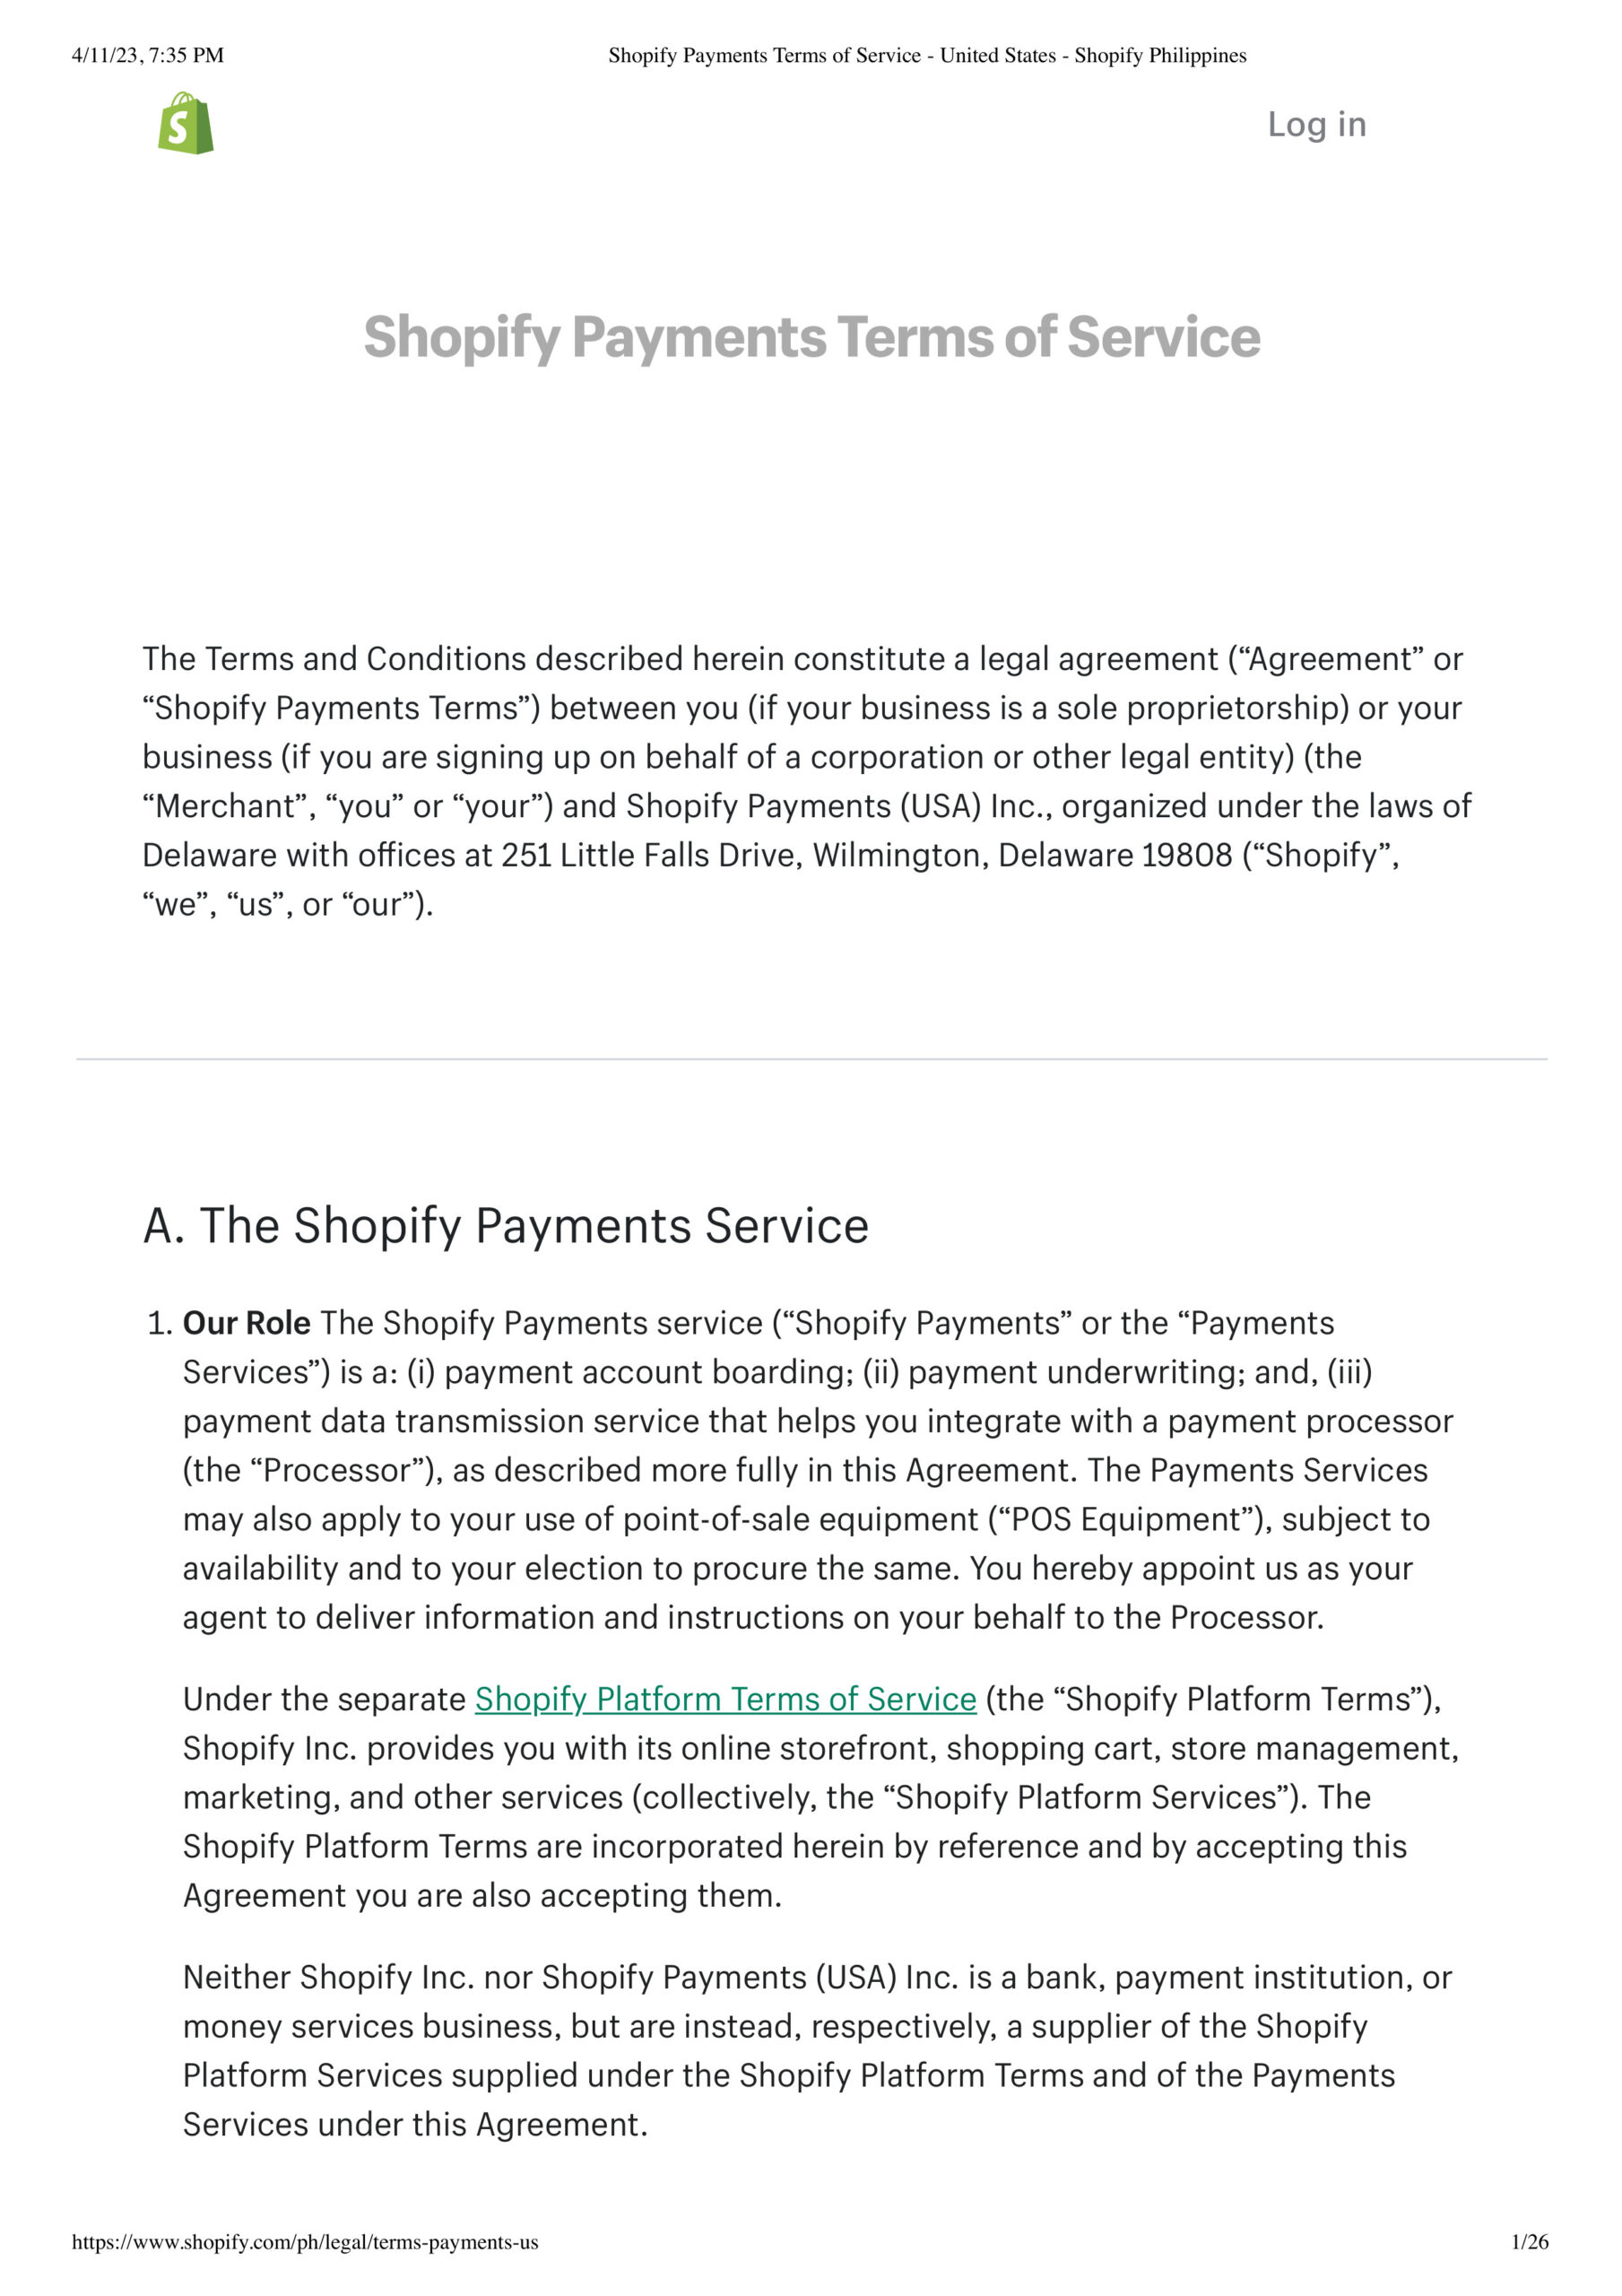 Screenshot of the first page of Shopify Payment Terms of Service